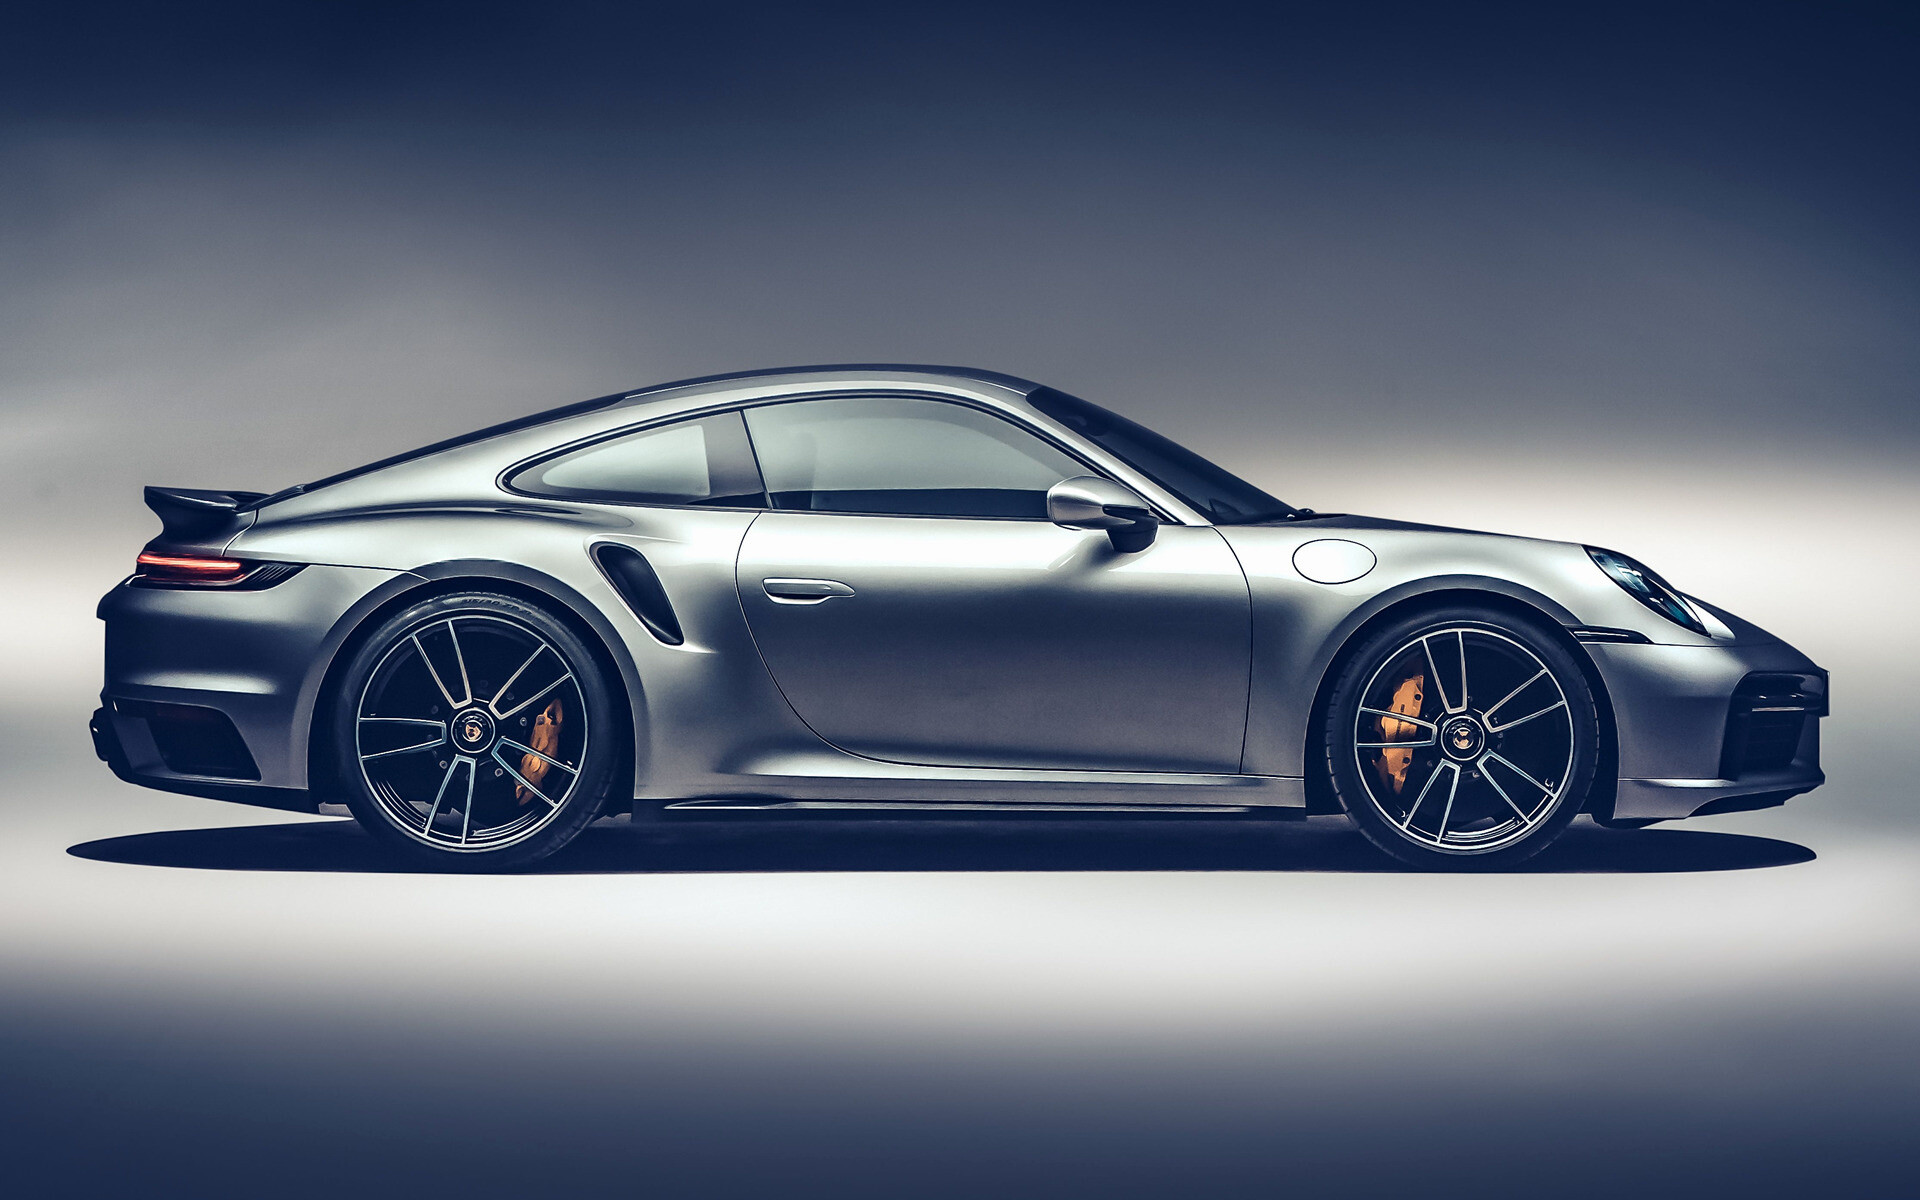 Porsche 911: 2020 Turbo S model, The change to the 7th generation (991) took place in the middle of the 2012 model year. 1920x1200 HD Wallpaper.